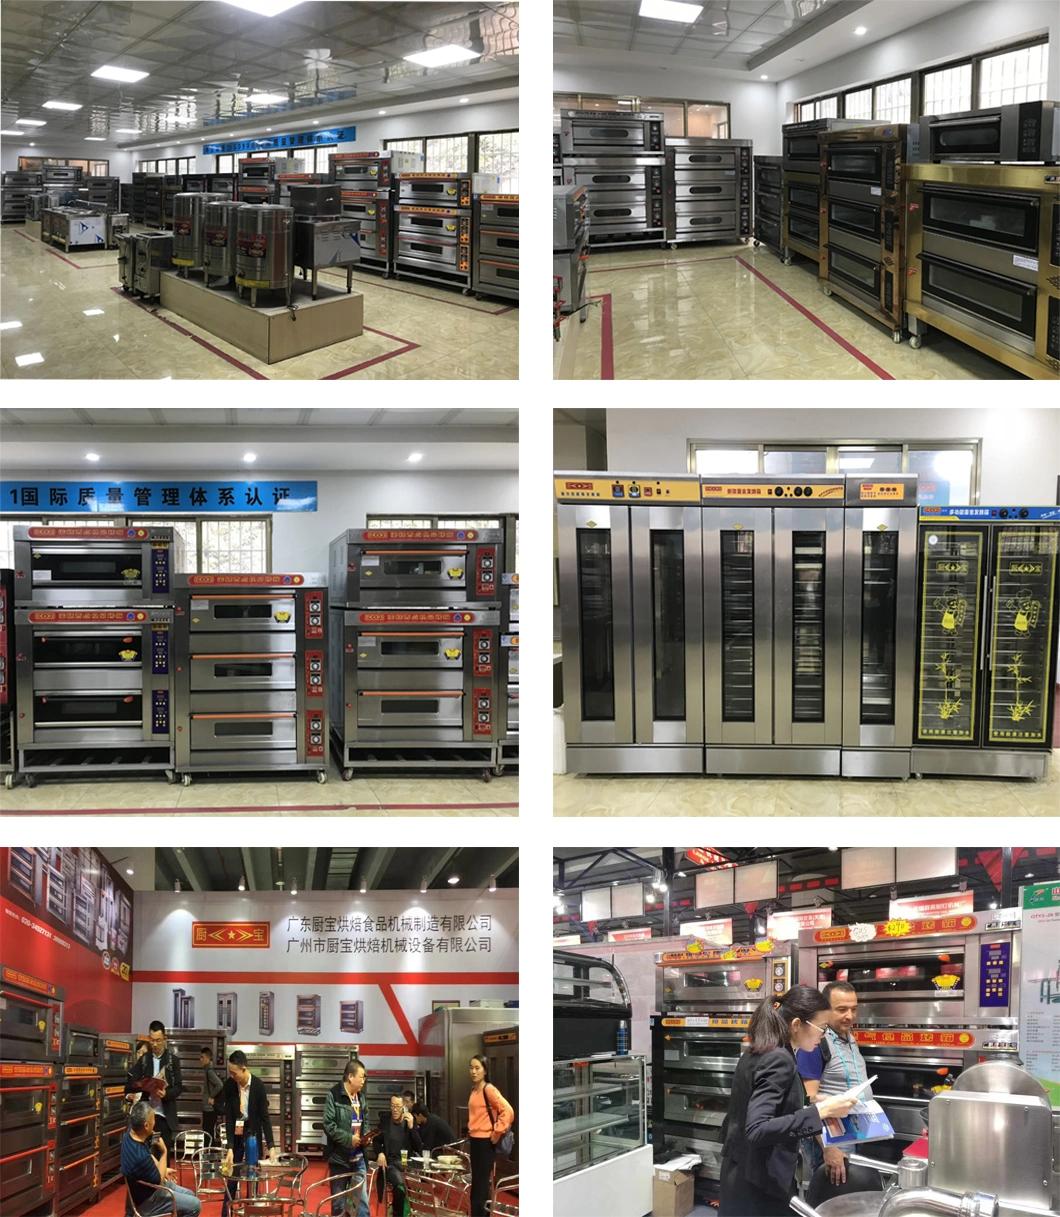 4 Deck 16 Trays Electric Oven for Commercial Restaurant Kitchen Baking Equipment Bakery Machinery Food Machine Oven